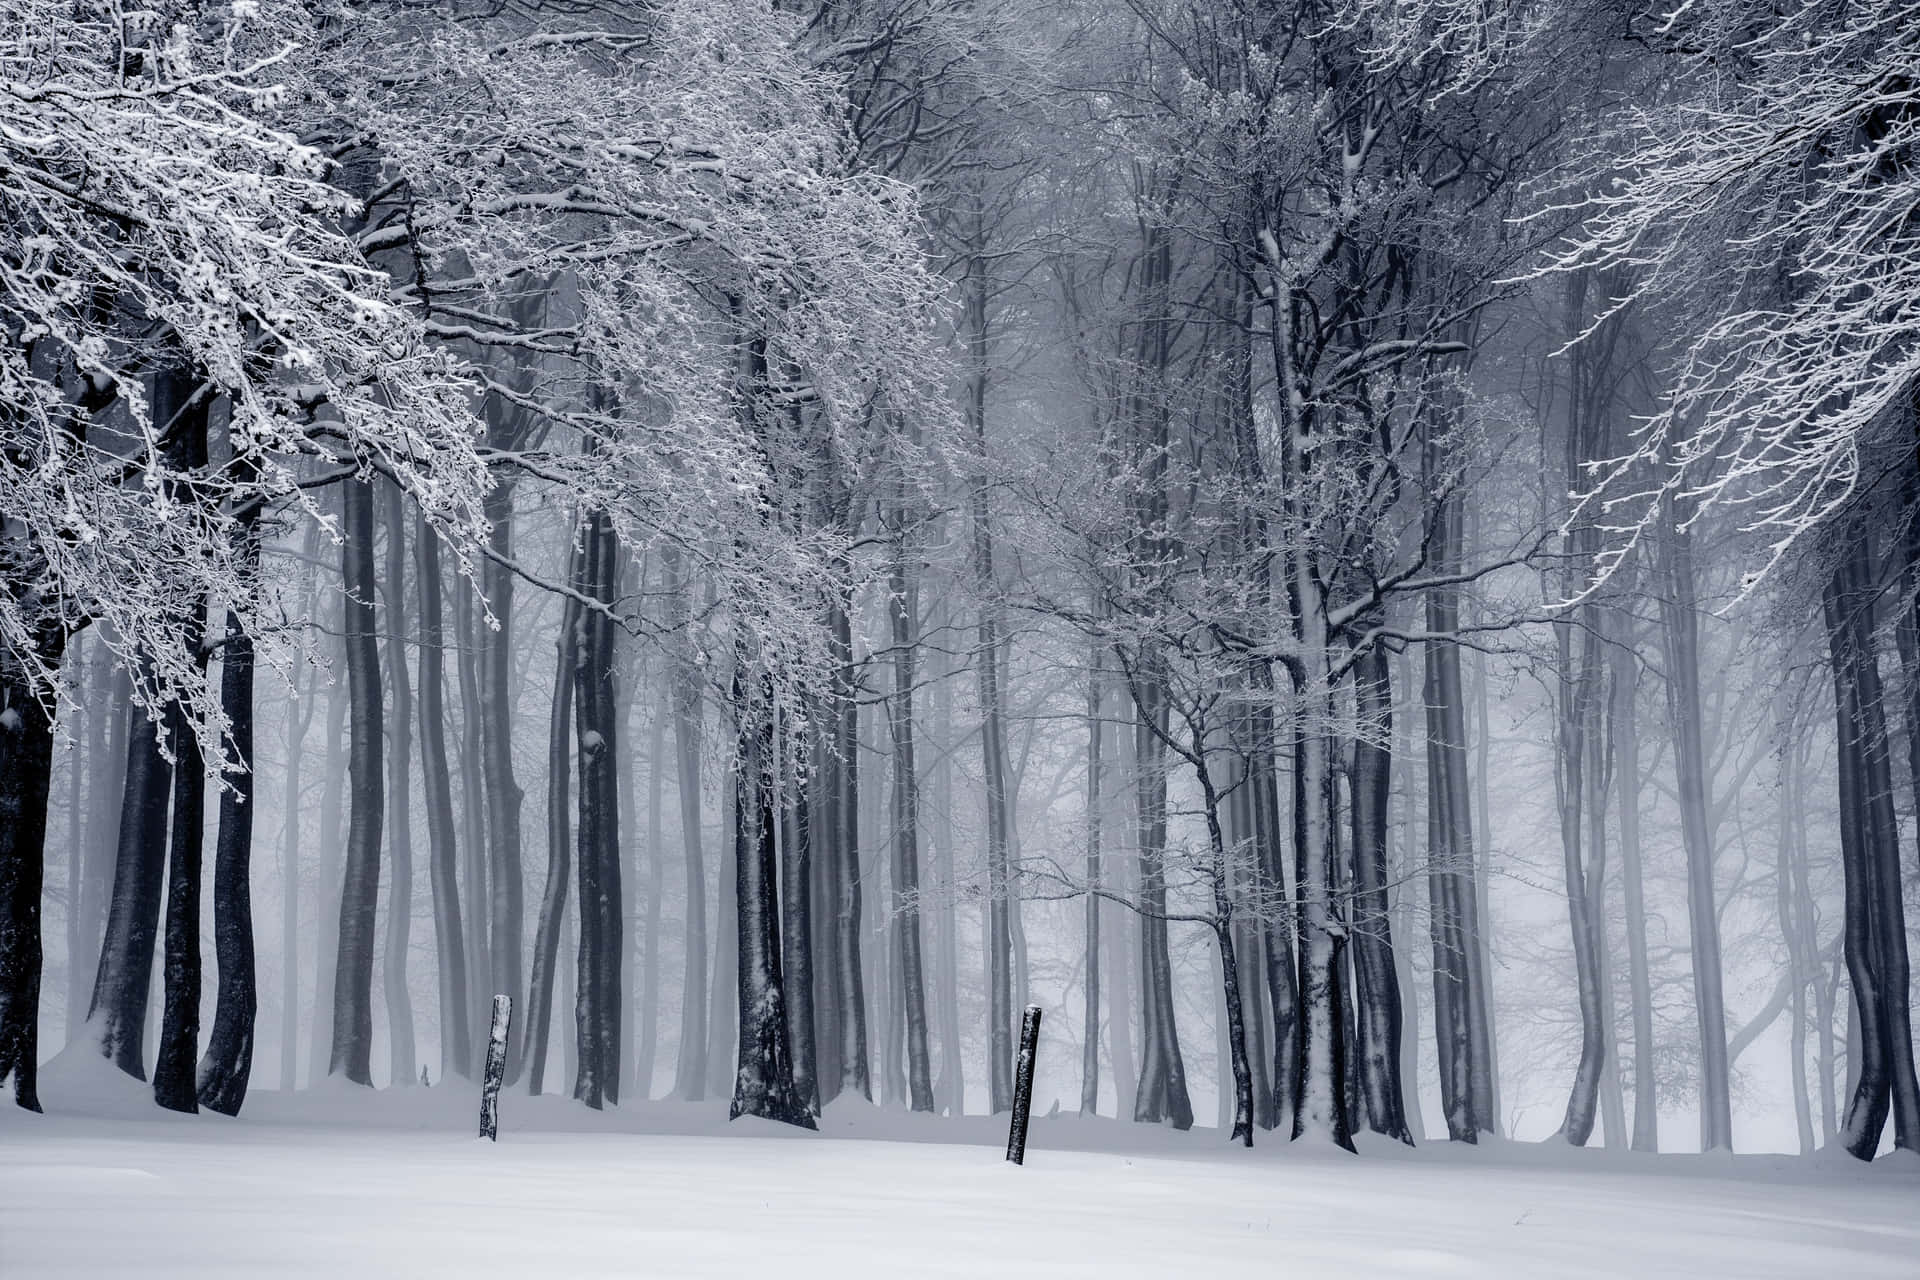 A Snowy Forest With Trees Covered In Snow Wallpaper